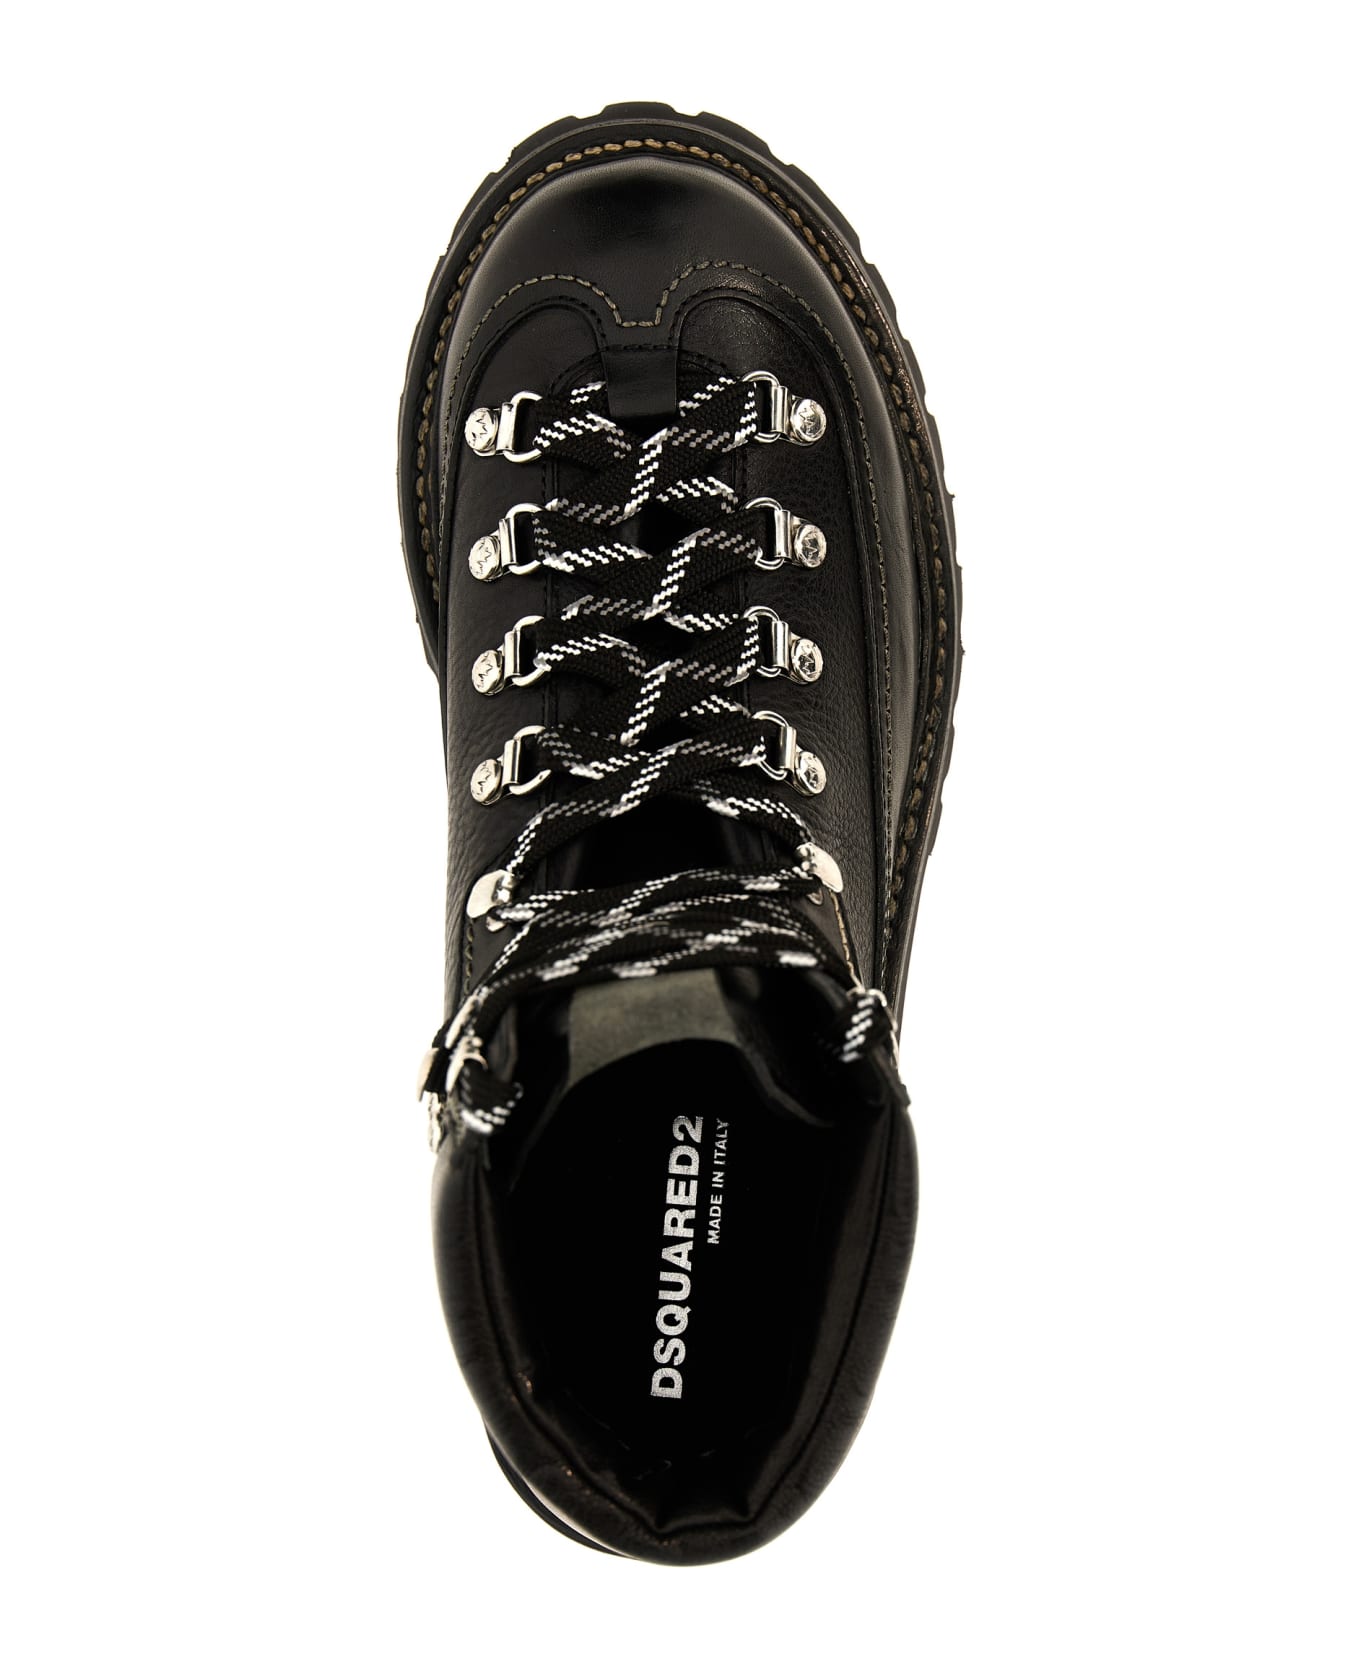 Dsquared2 Canadian Lace-up Leather Ankle Boots - black ブーツ